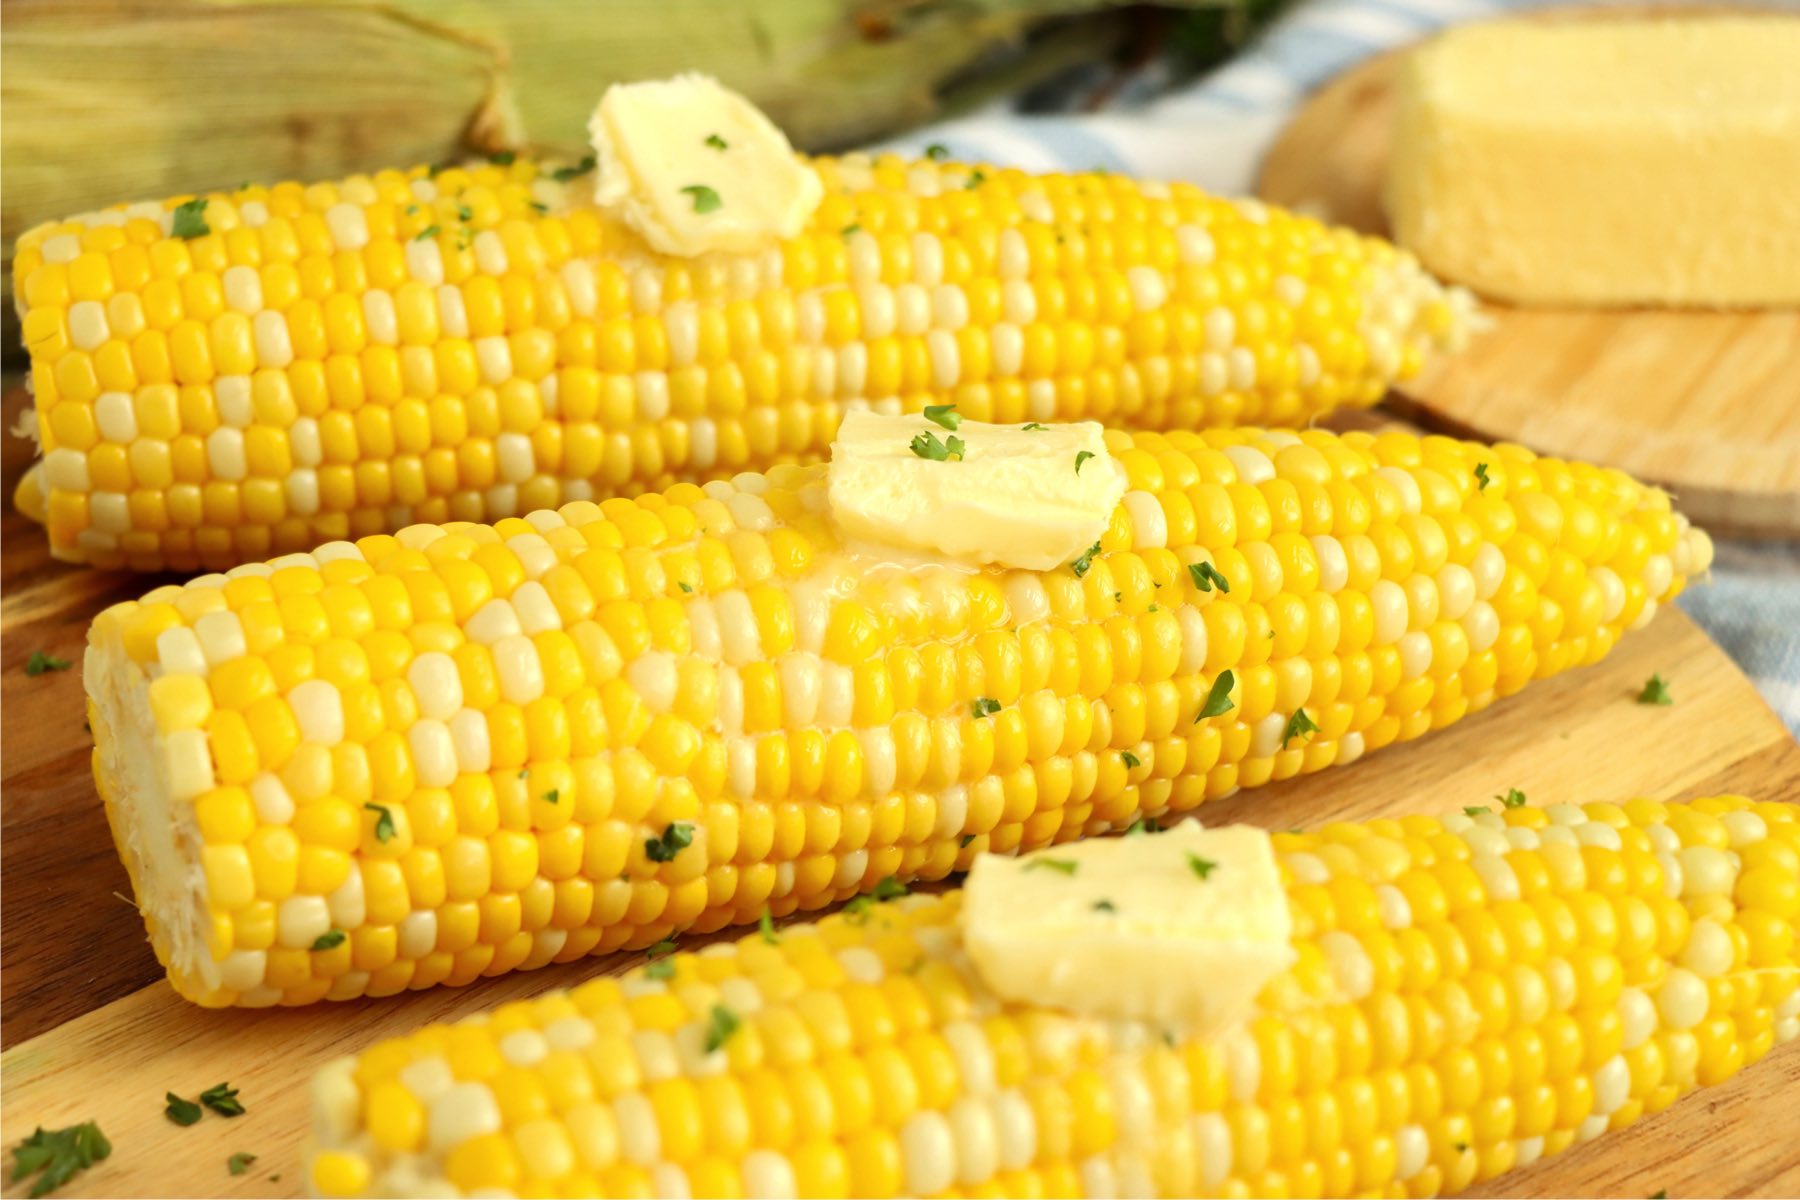 butter pats on cooked cobs of corn